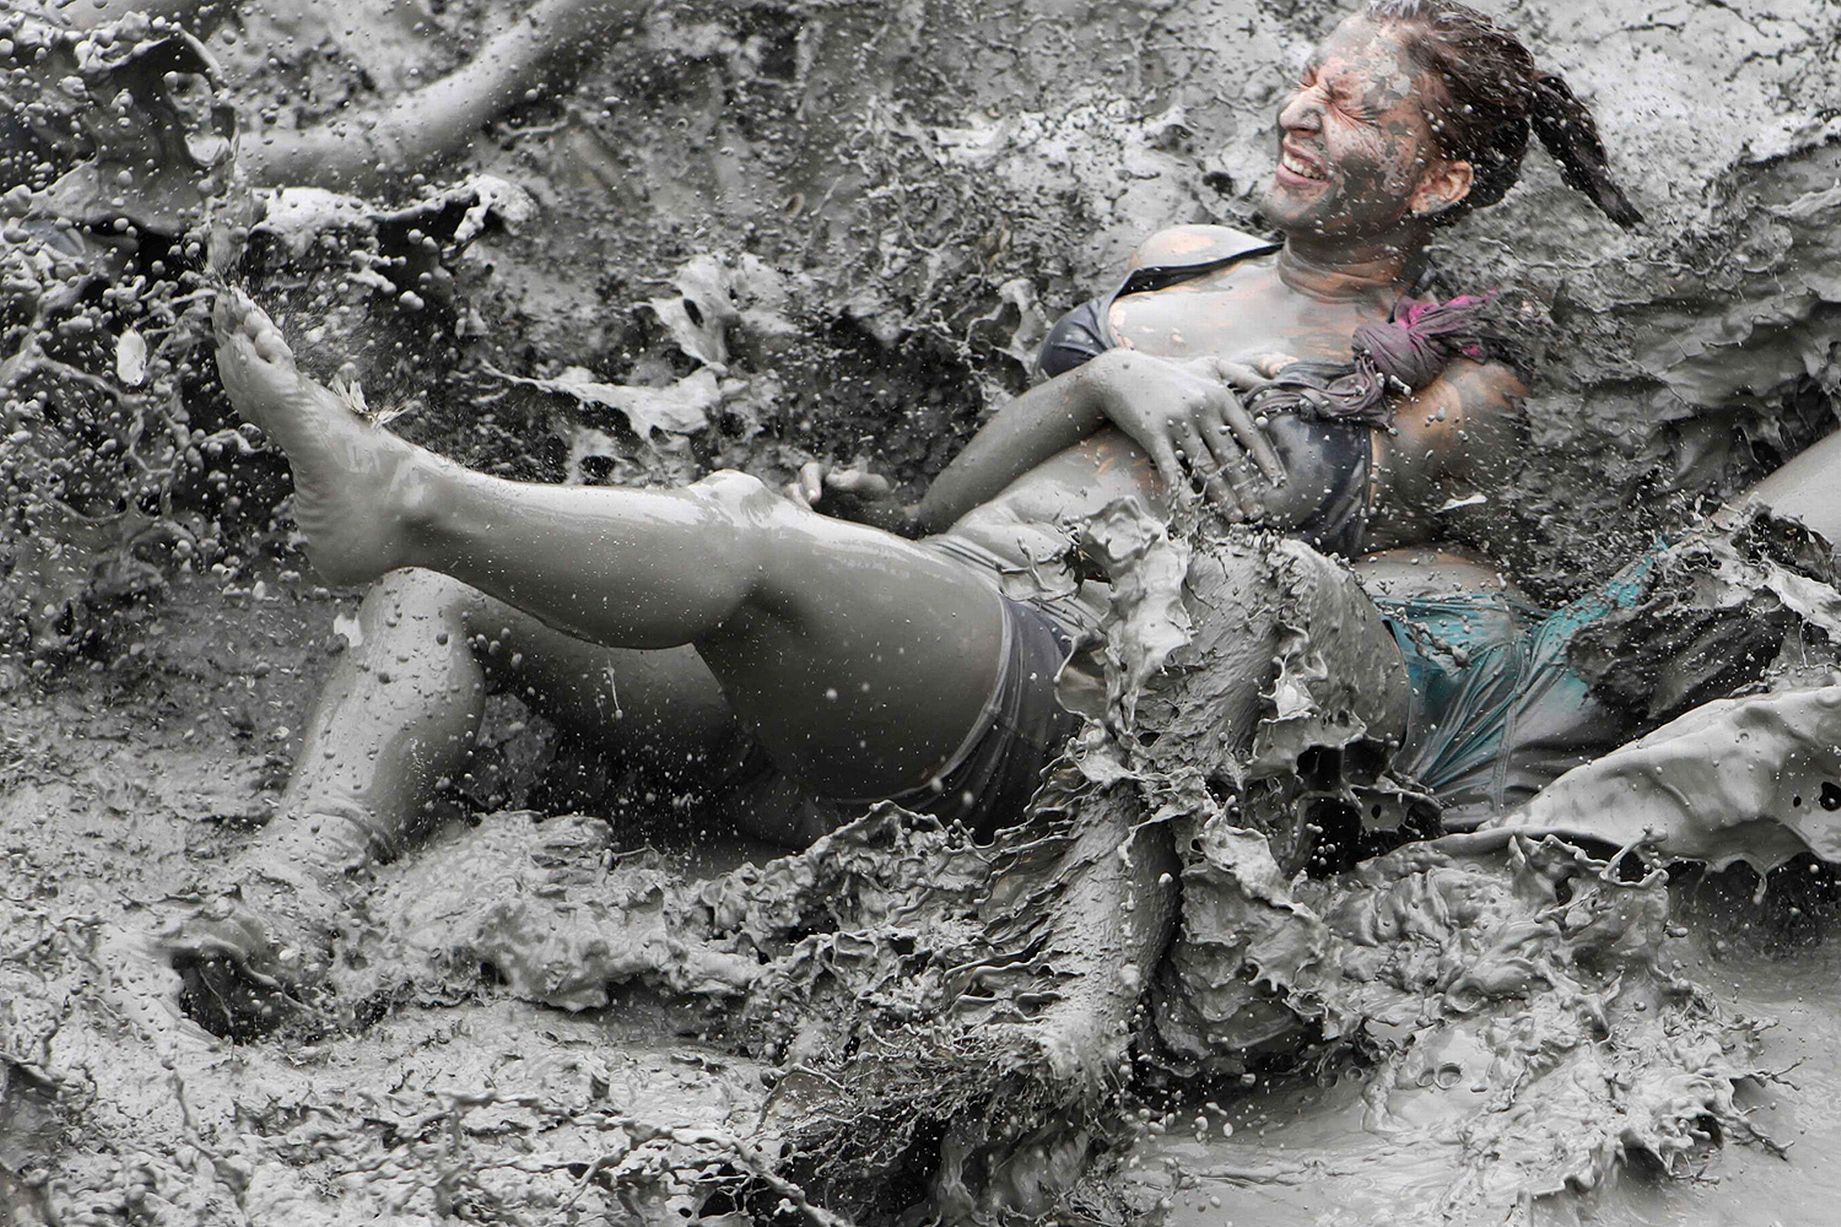 Tourists-play-in-mud-during-the-opening-day-of-the-Boryeong-Mud-Festival-at-Daecheon-beach-in-Boryeong.jpeg